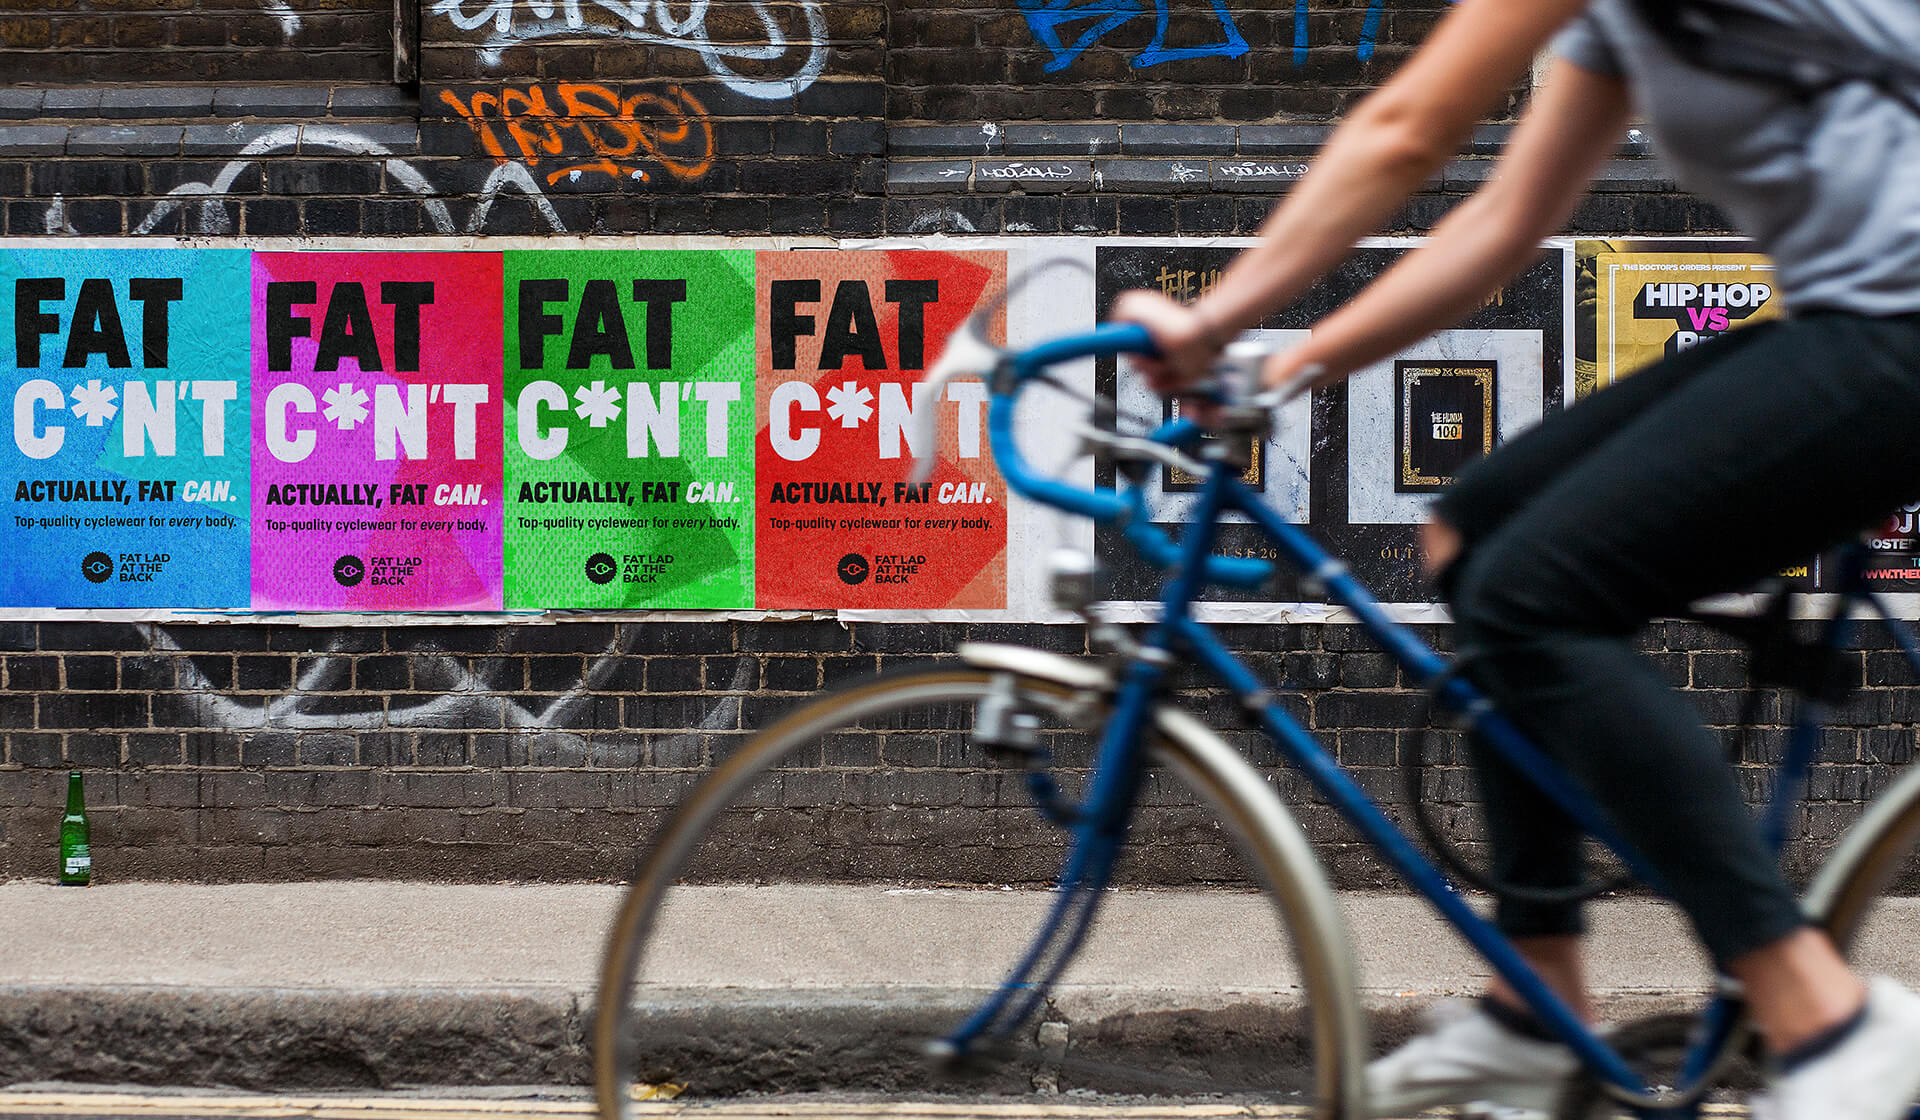 Fat Lad at the Back - Fat C*n't - Mellor&Smith - Ad campaign - Outdoor Flyposting - Paul Mellor